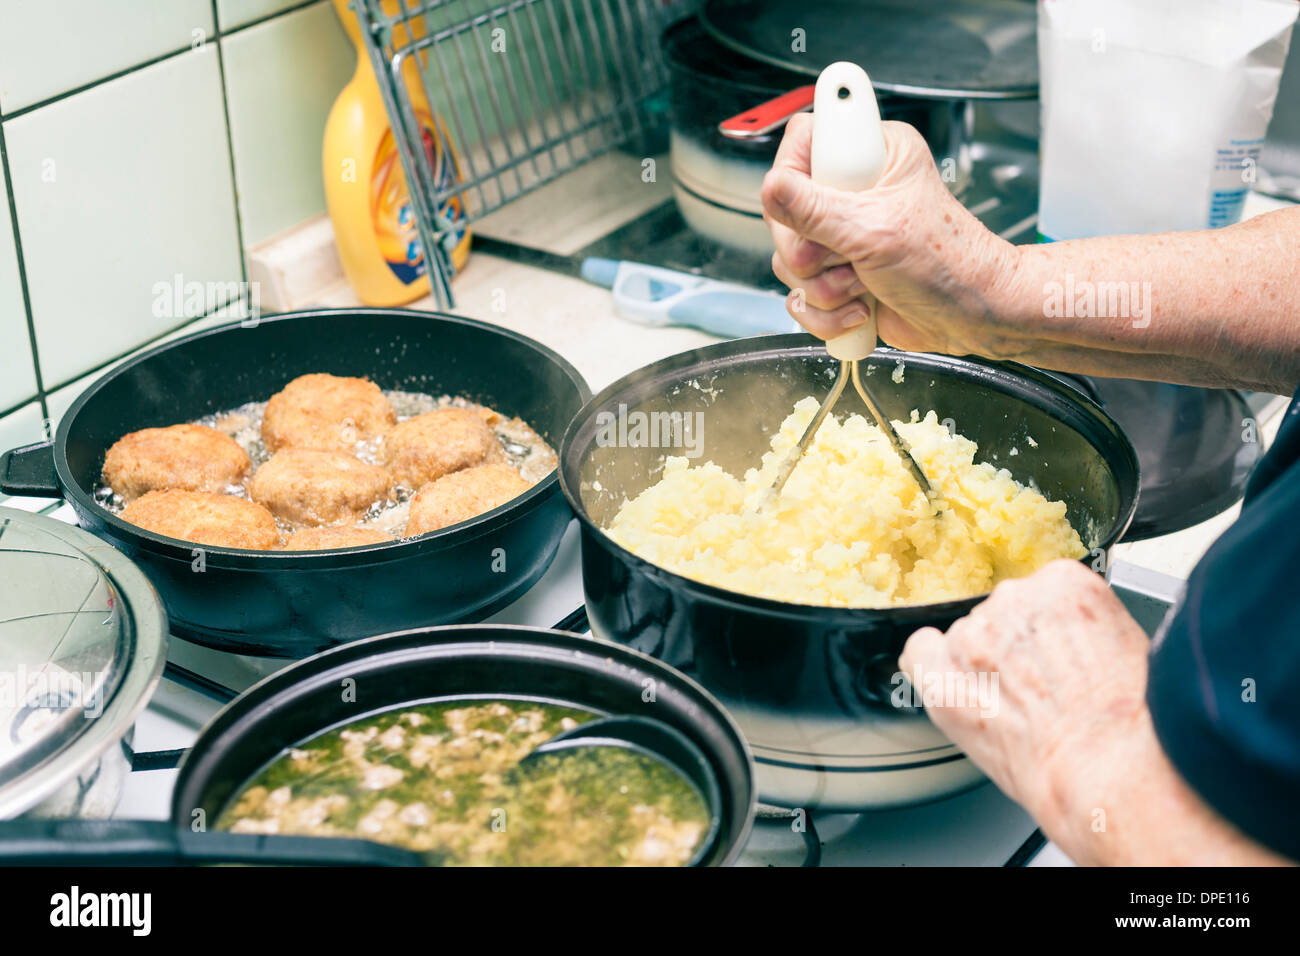 Detail of woman cooking lunch on cooker at home, Czech Republic. Stock Photo